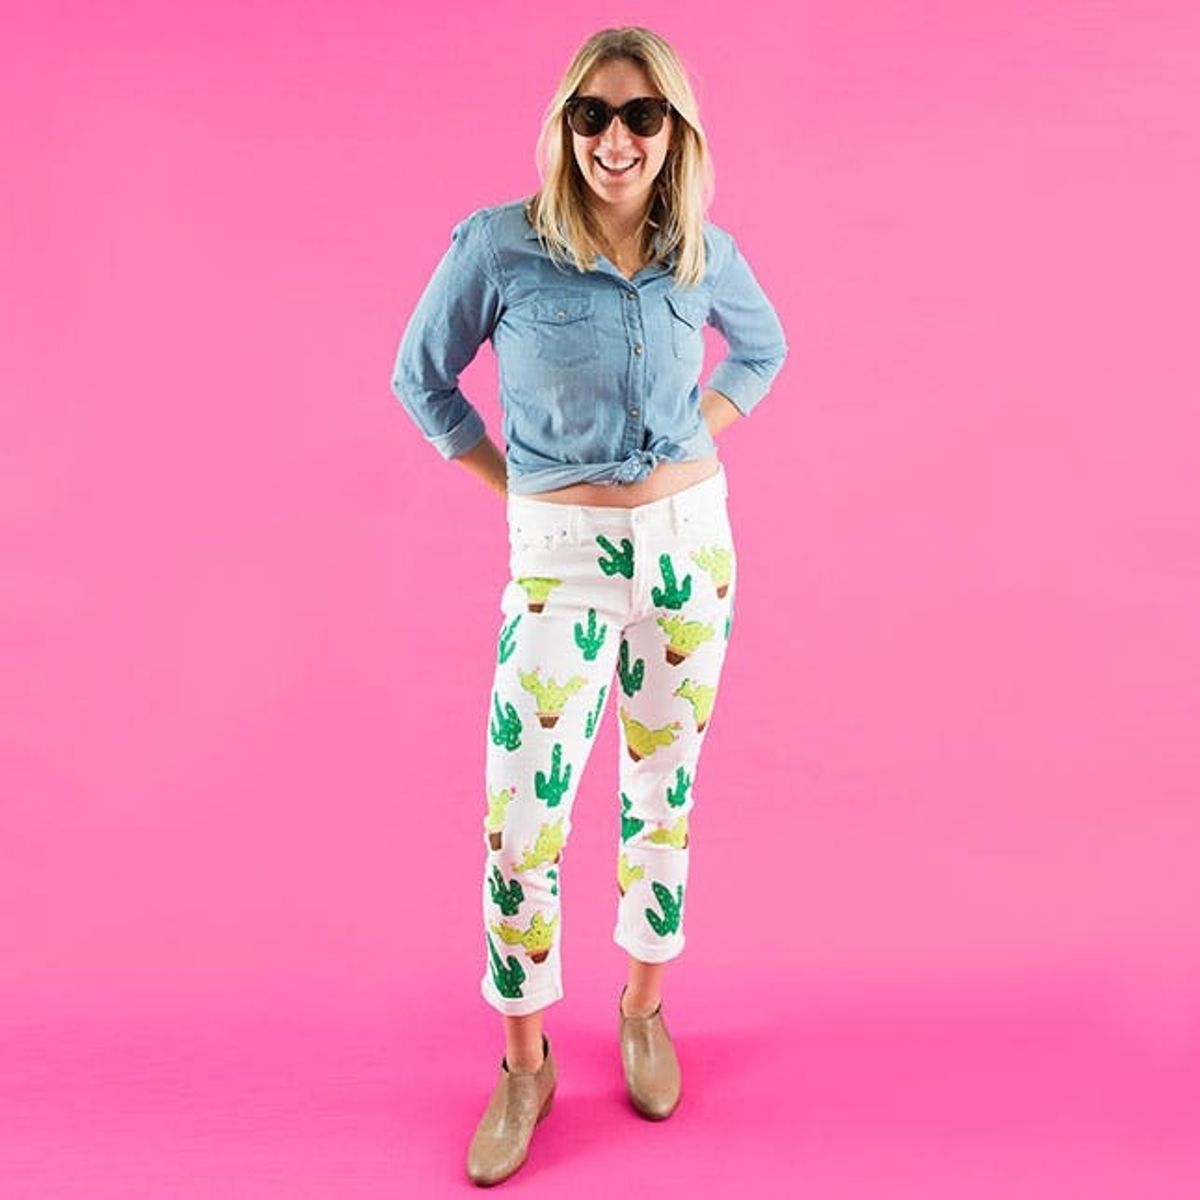 How to Hack Lena Dunham’s Cute Cactus Pants from Instagram